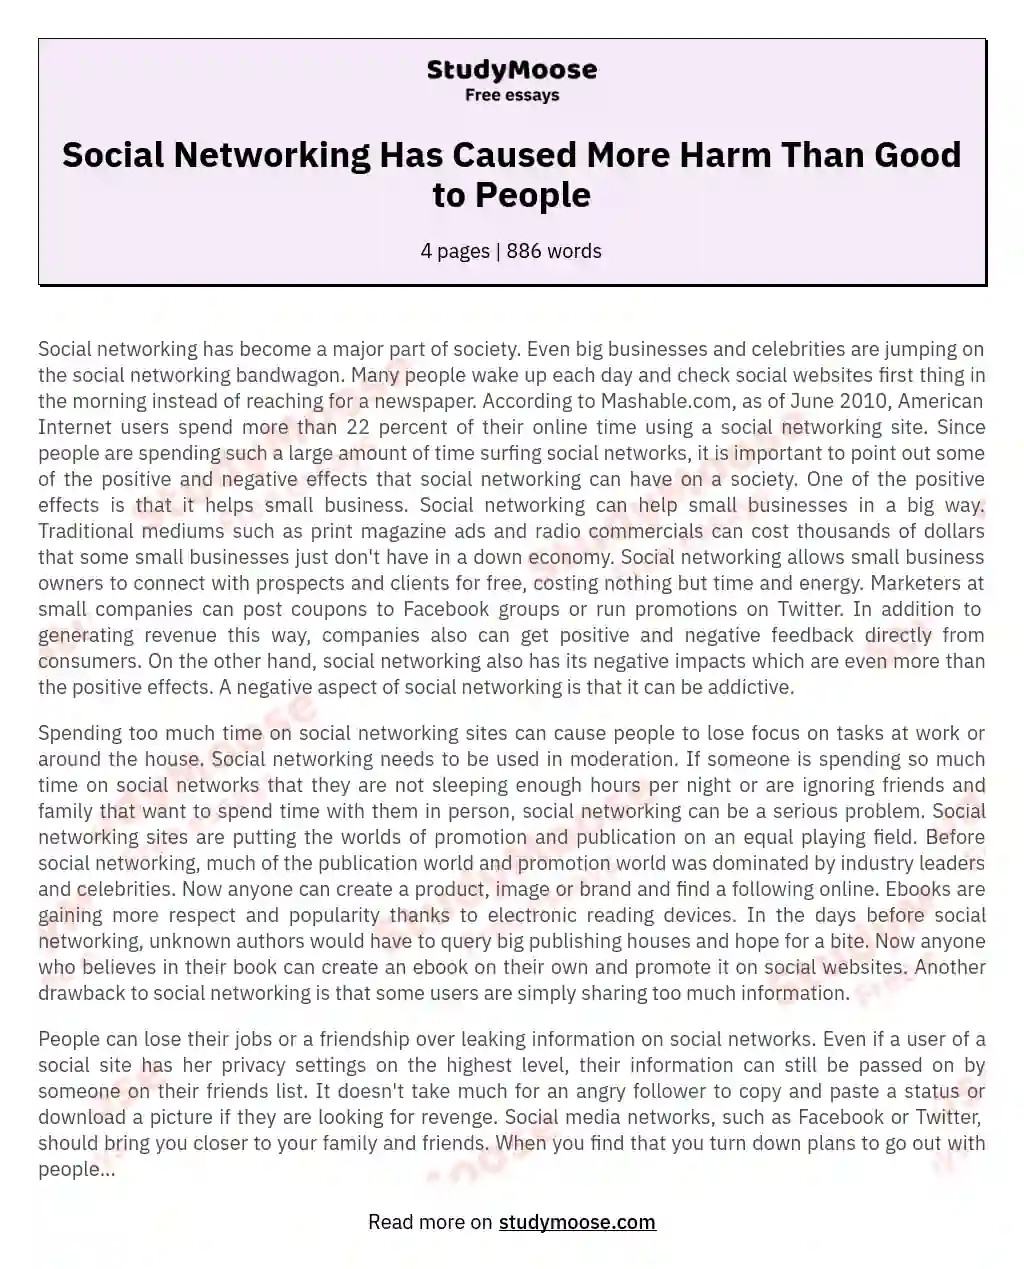 Social Networking Has Caused More Harm Than Good to People essay